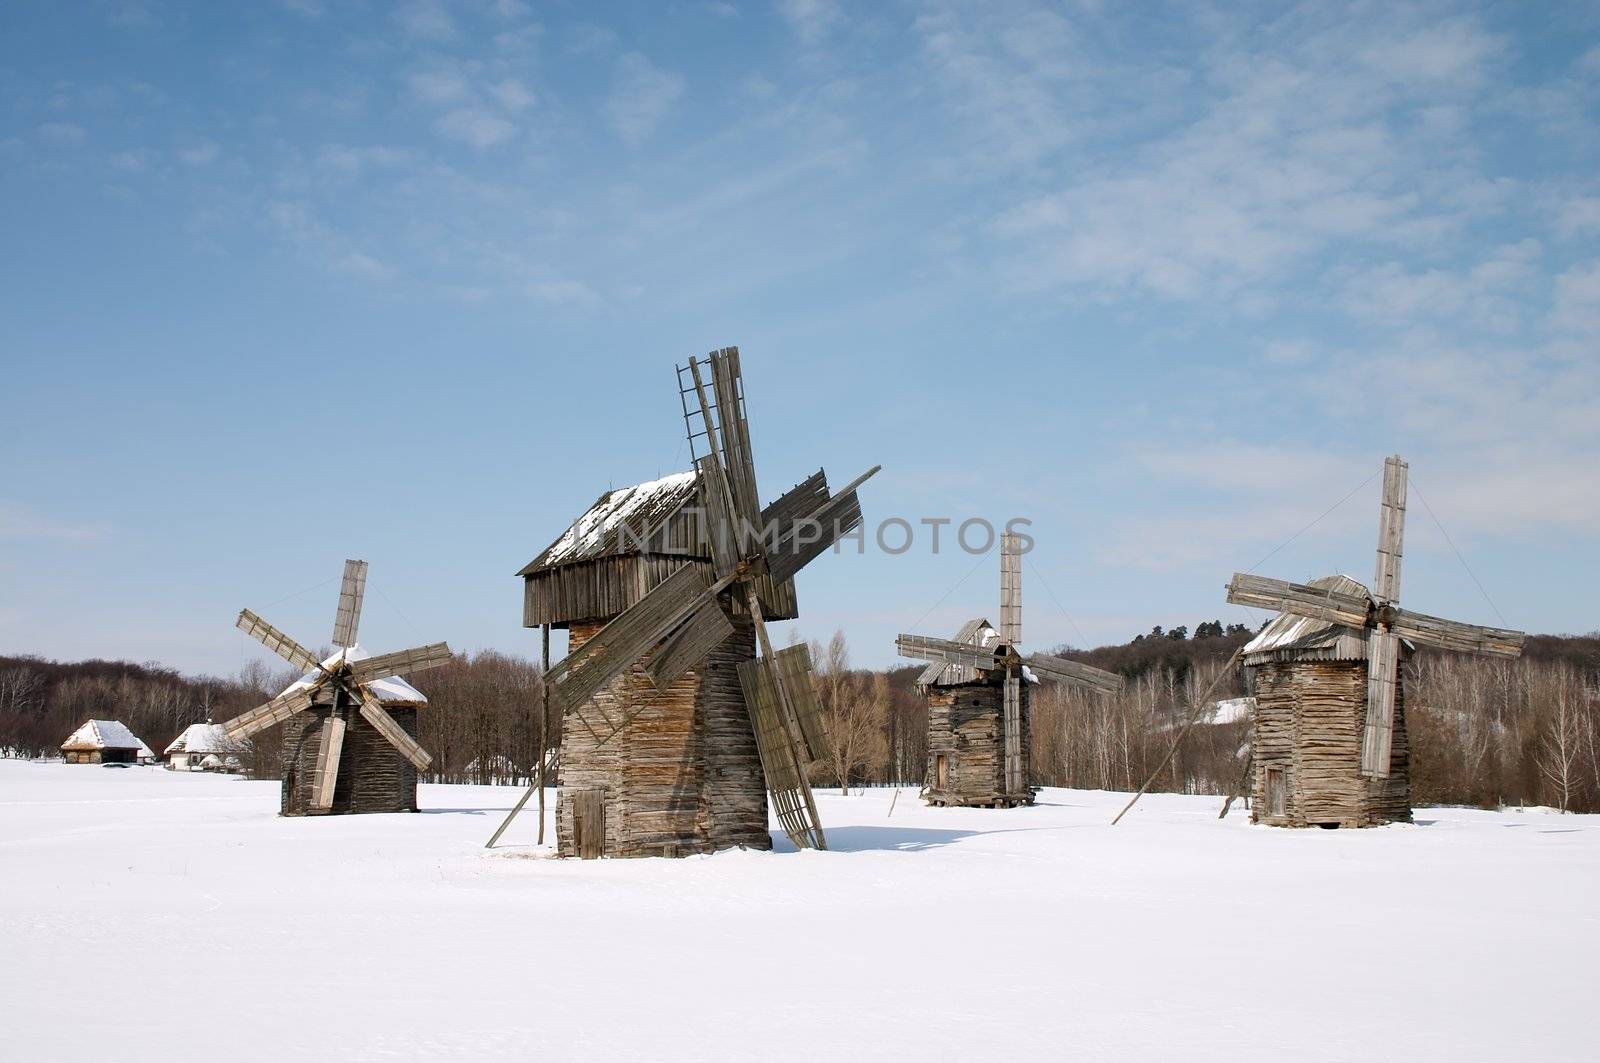 Windmills in the winter countryside scenic under blue sky